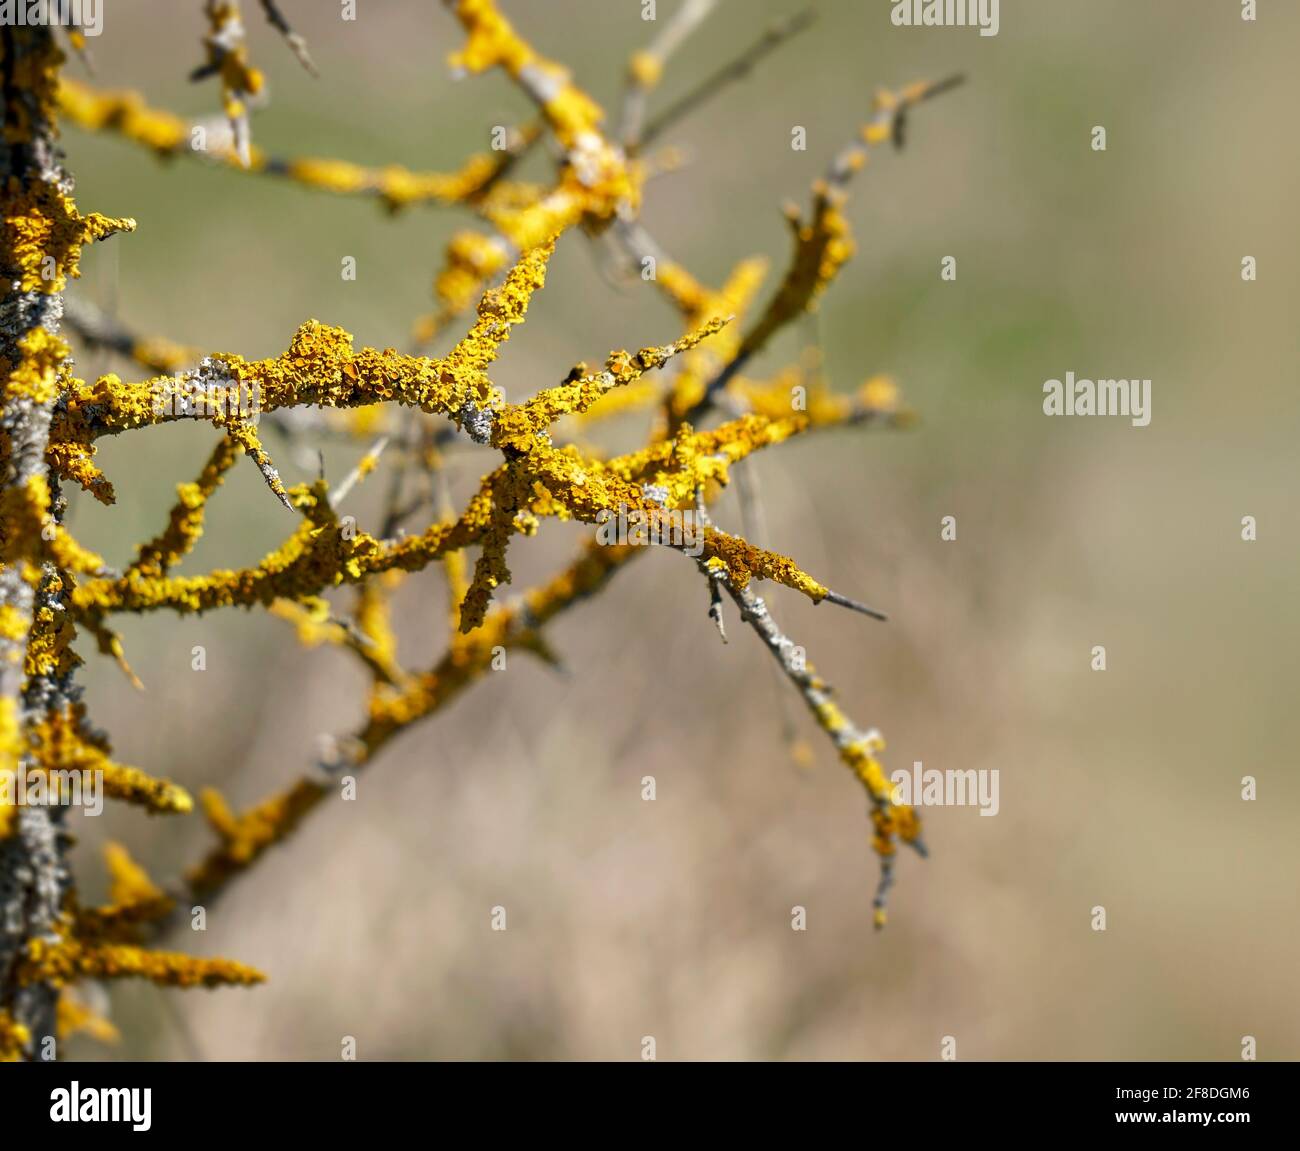 Sick tree branches with yellow parasitic fungus named Maritime sunburst lichen or Xanthoria parietina. Detailed picture of yellow shore lichen on tree Stock Photo